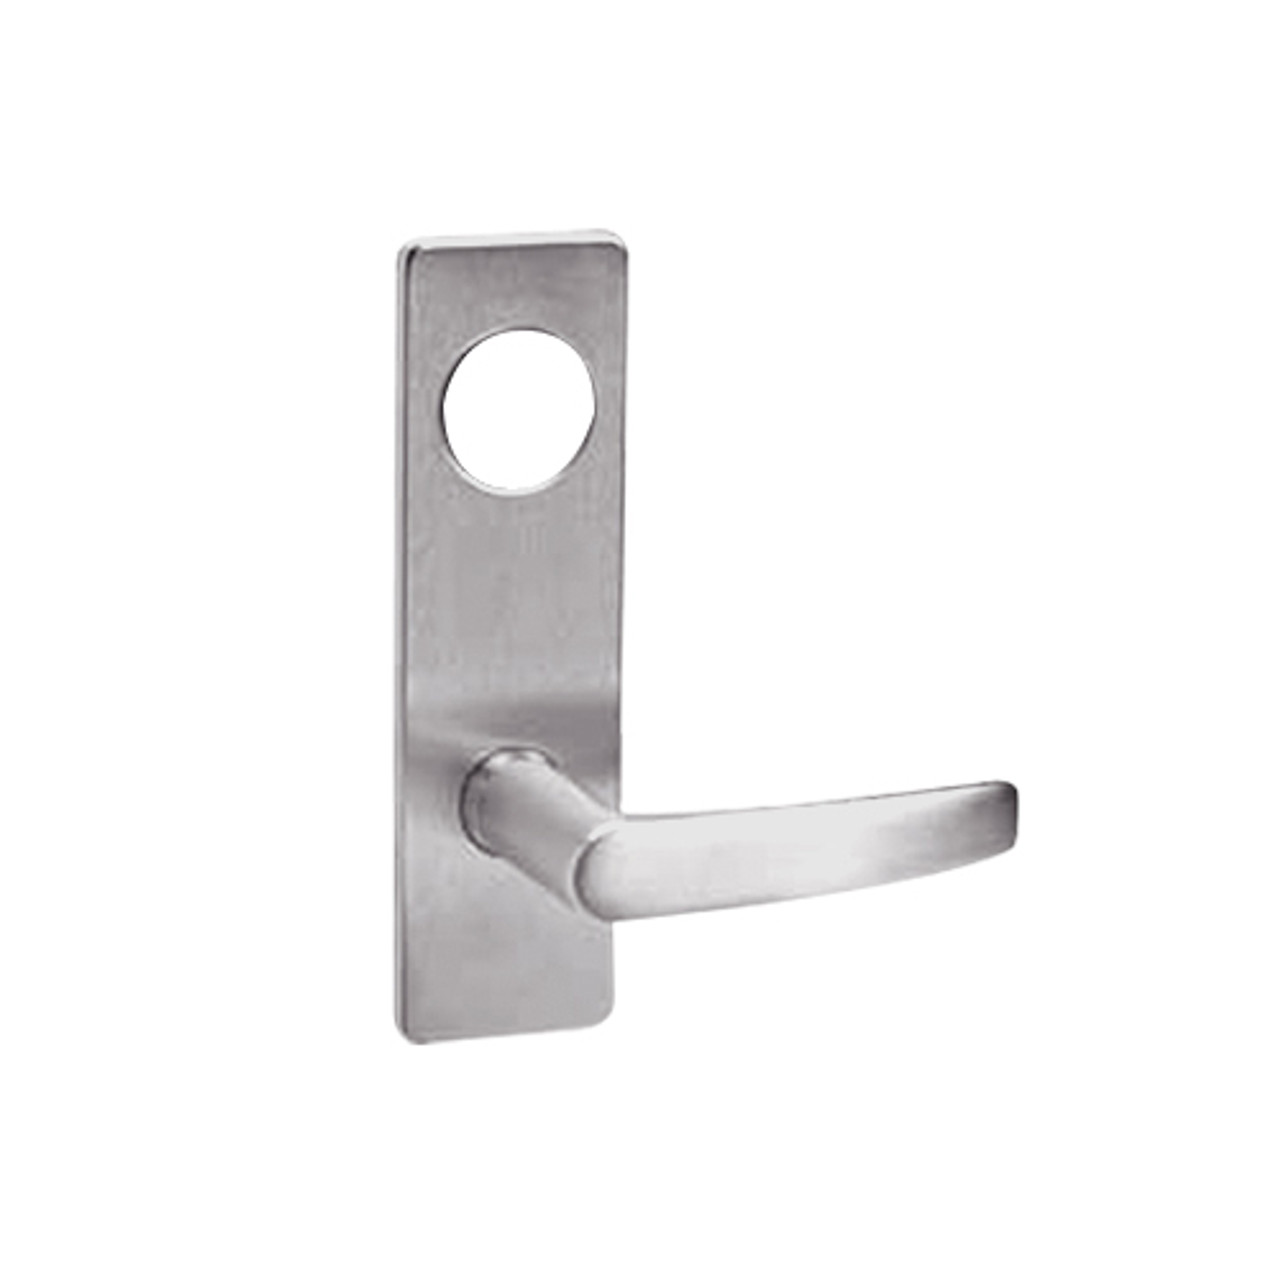 ML2042-ASR-630-CL6 Corbin Russwin ML2000 Series IC 6-Pin Less Core Mortise Entrance Locksets with Armstrong Lever in Satin Stainless